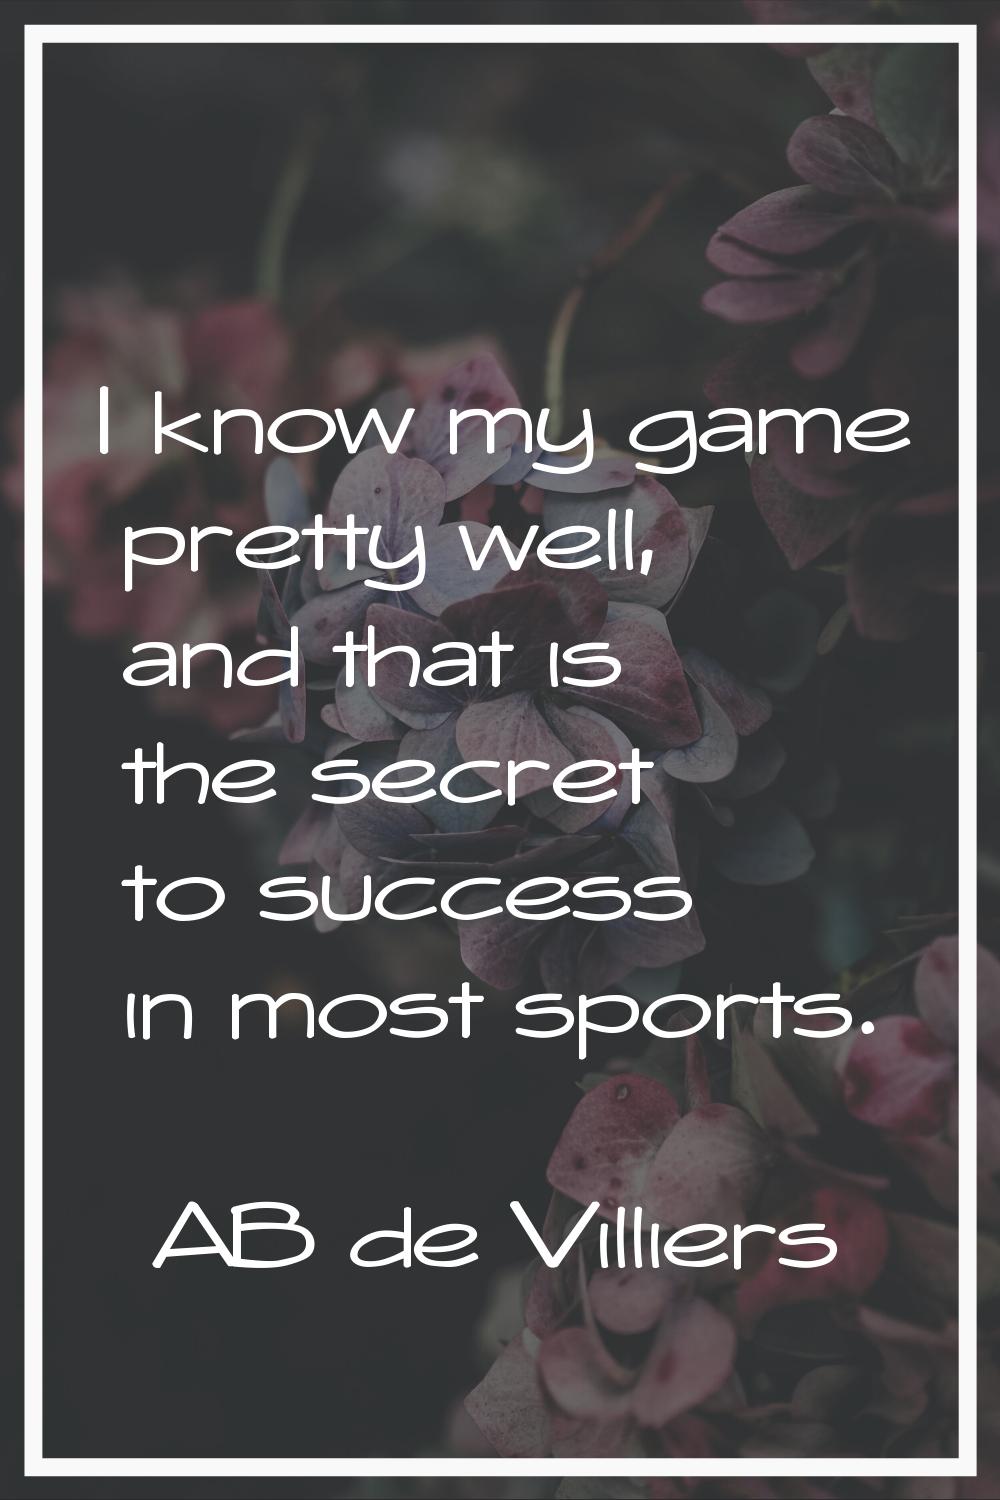 I know my game pretty well, and that is the secret to success in most sports.